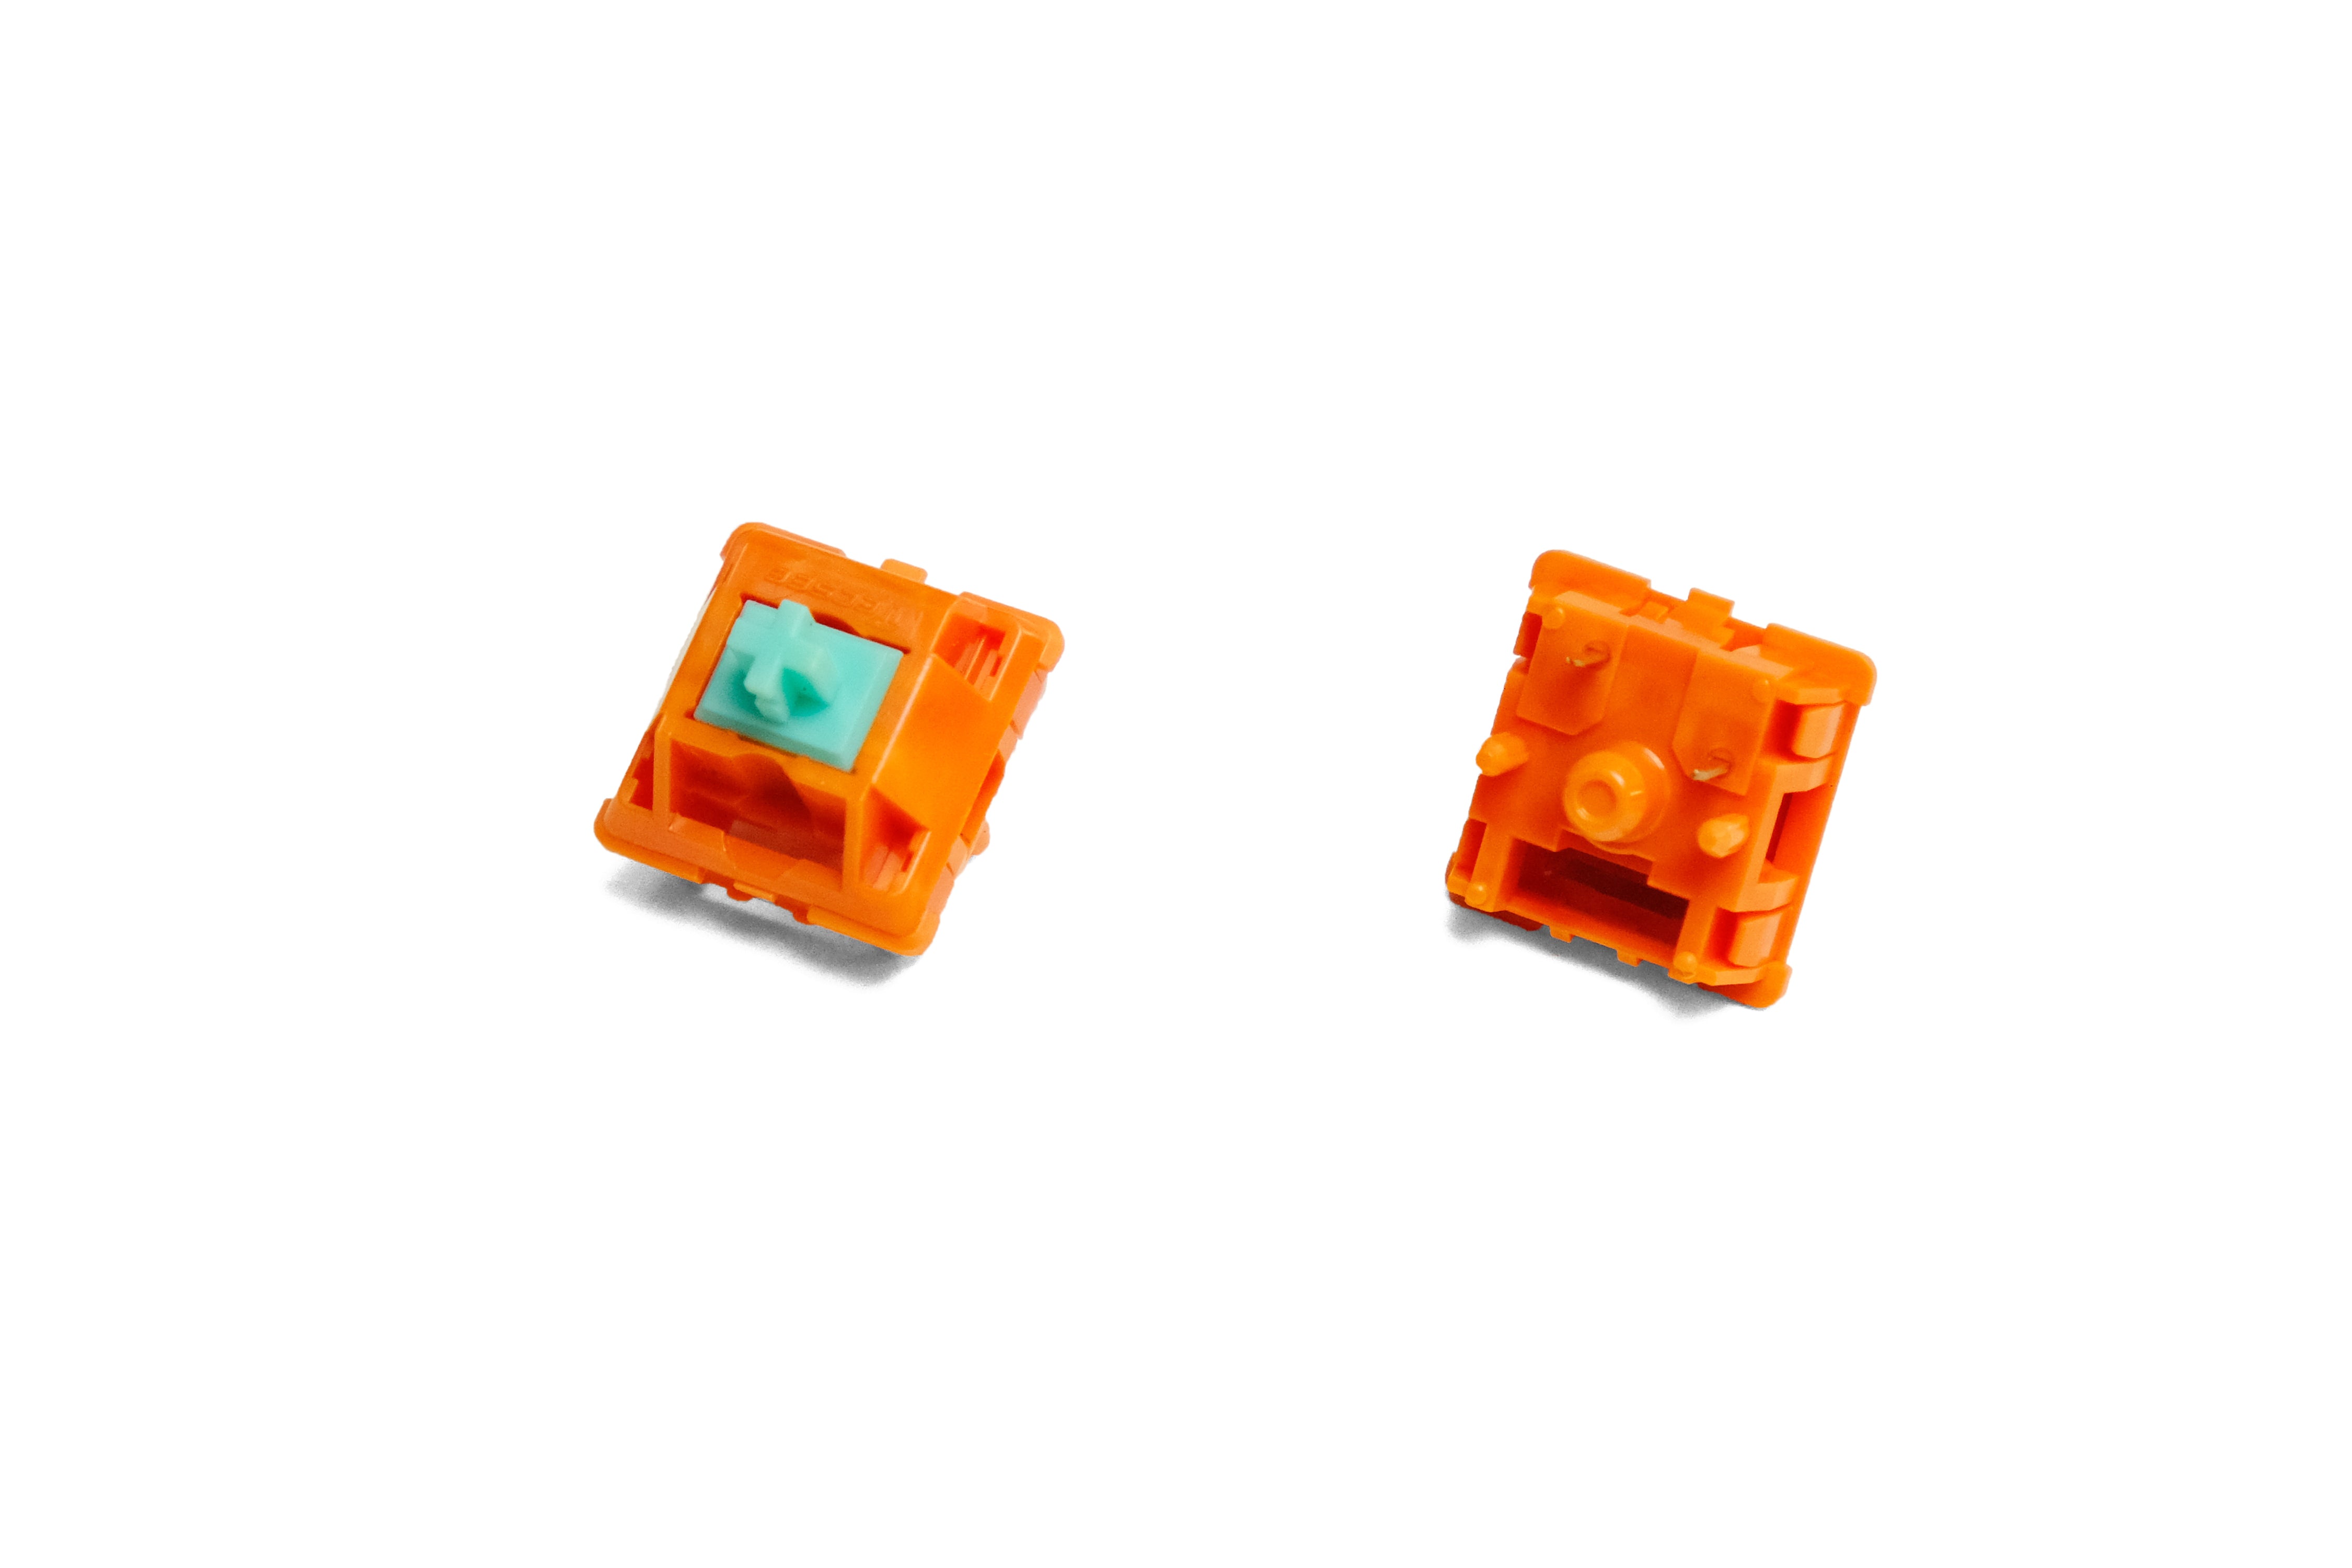 Tecsee Carrot Linear Switches at KeebsForAll